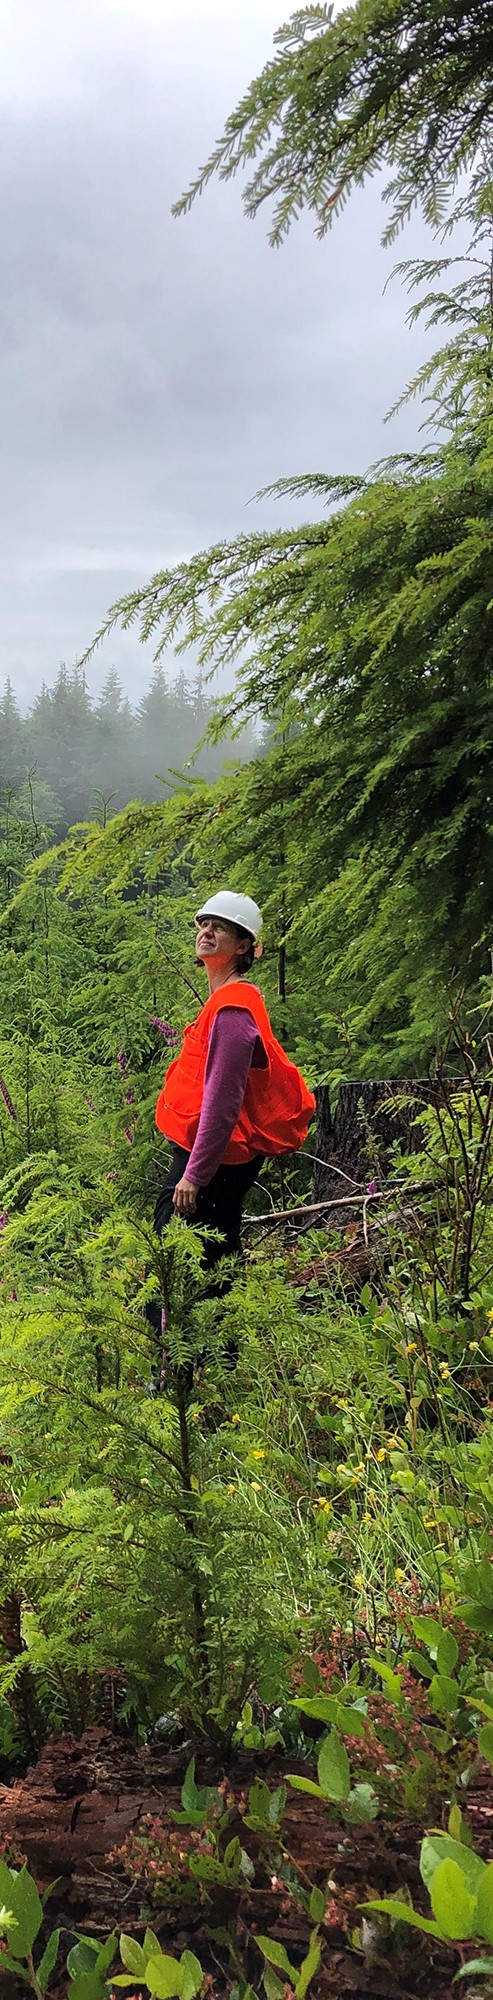 An Earthwatch volunteer standing in the Olympic State Experimental Forest